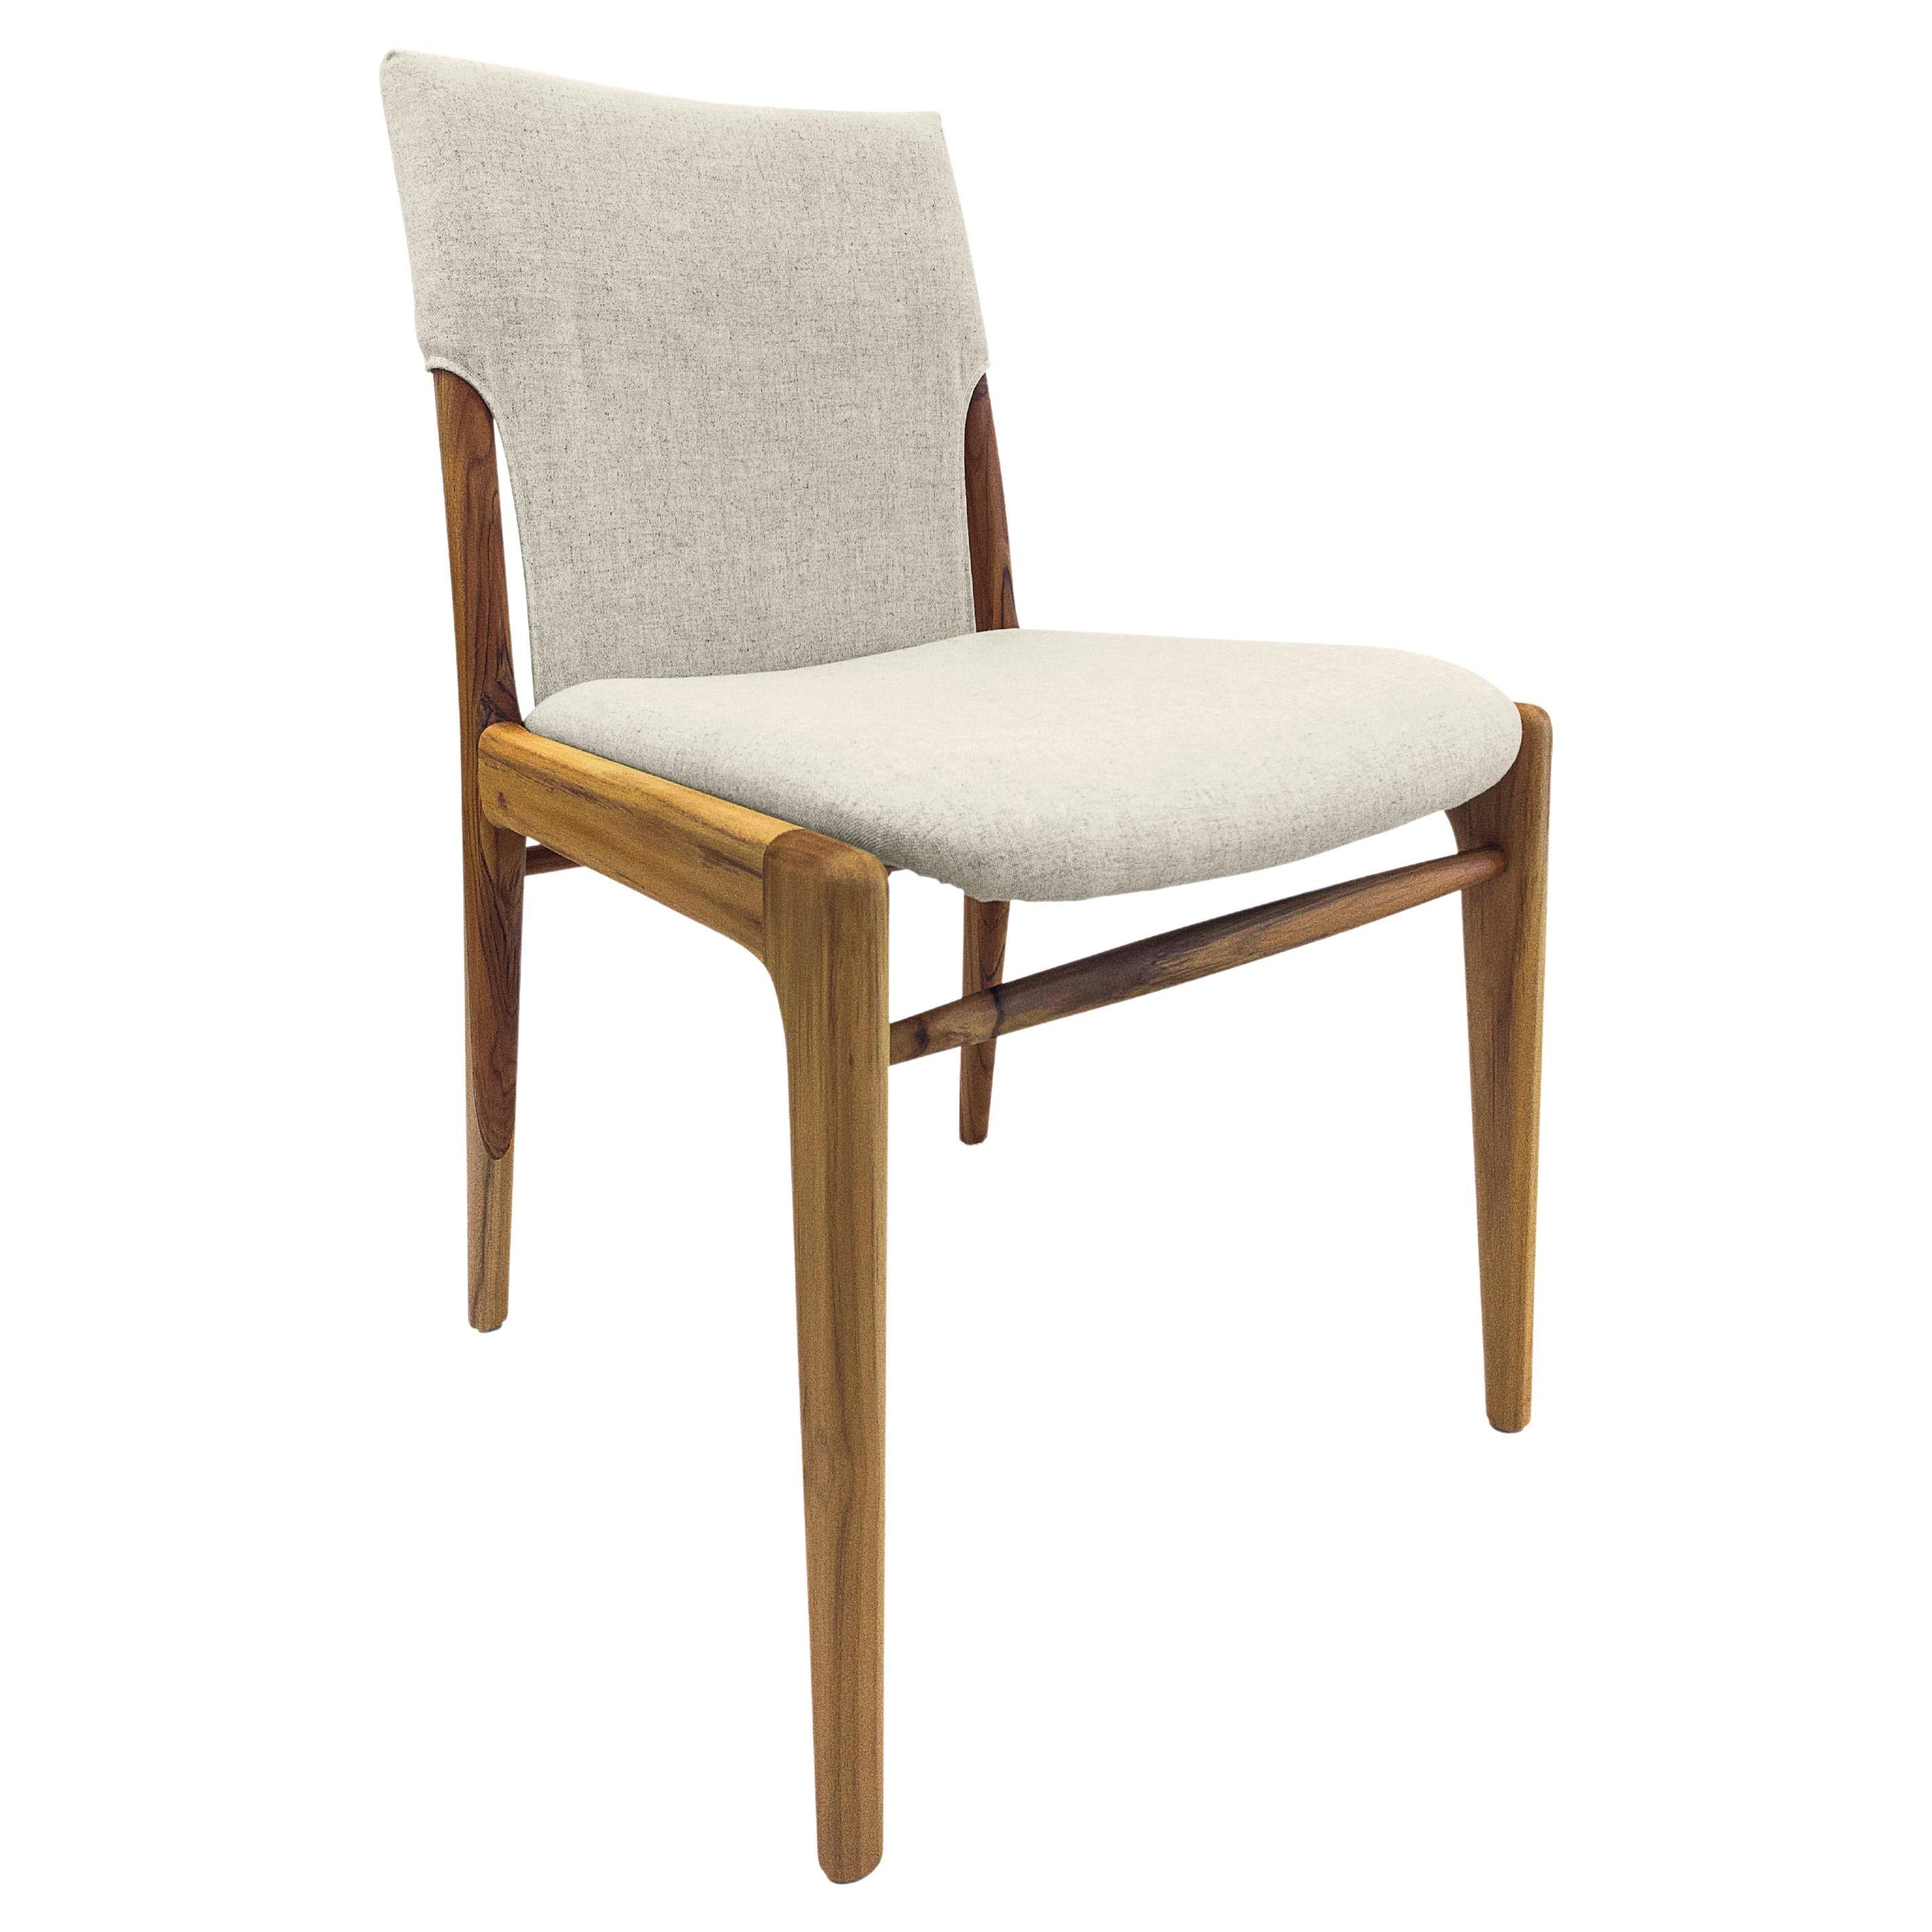 Legendary Uultis designer Mr. Sergio Batista has created the Tress dining chair in a linen fabric upholstered and a teak wood finish. His creations are synonymous with style, elegance, comfort, and quality. With the Tress chair, Mr. Batista has